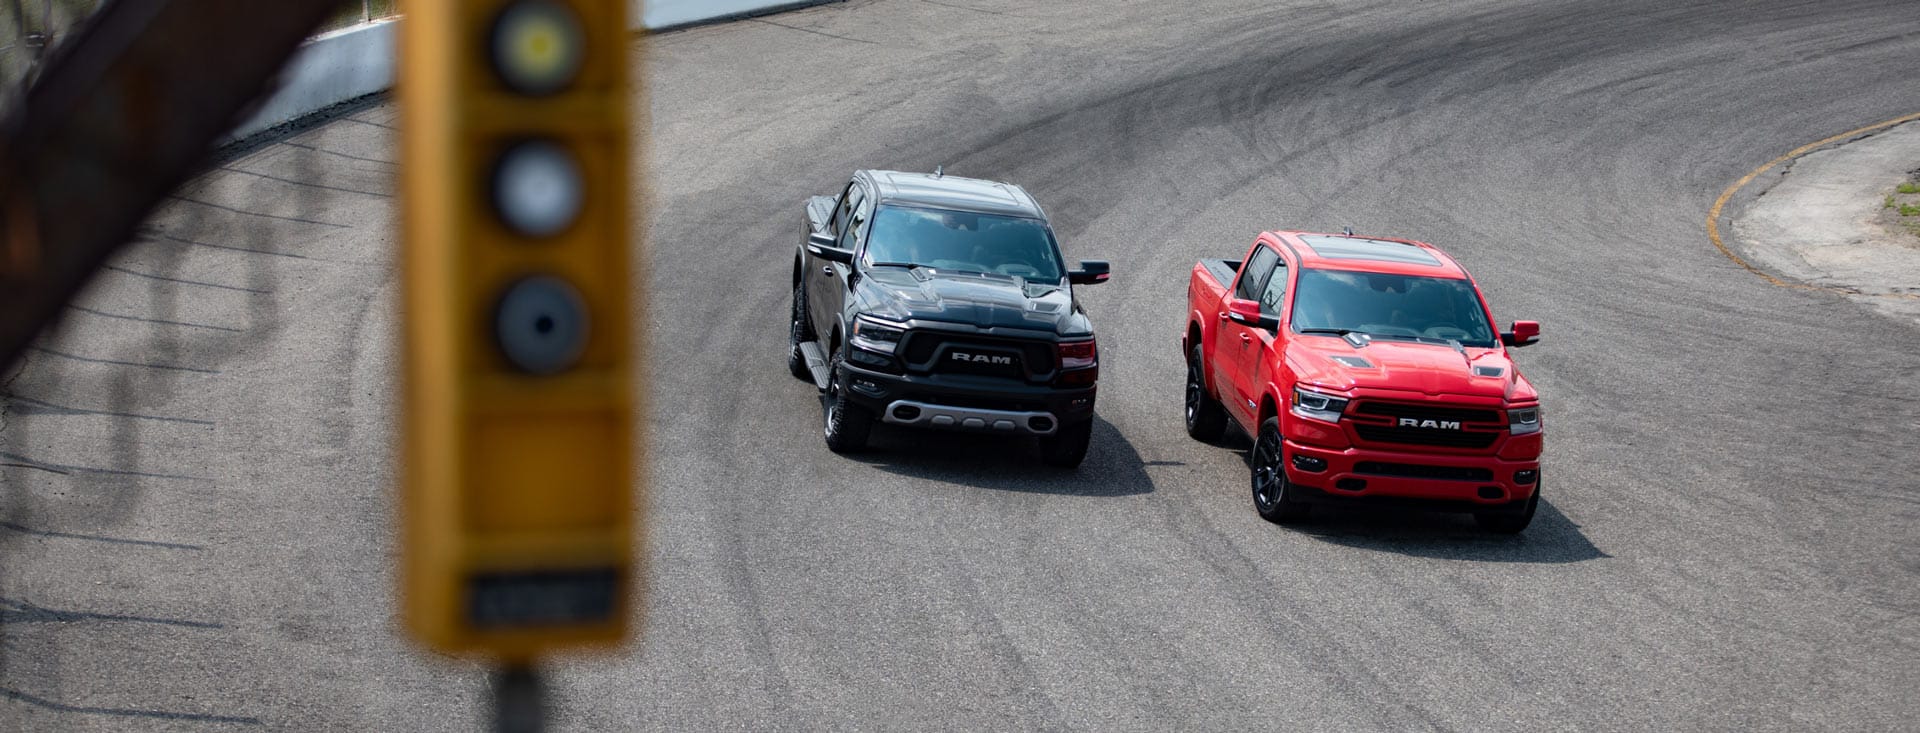 The 2022 Ram 1500 Laramie G/T and Rebel GT rounding a curve on a racetrack.